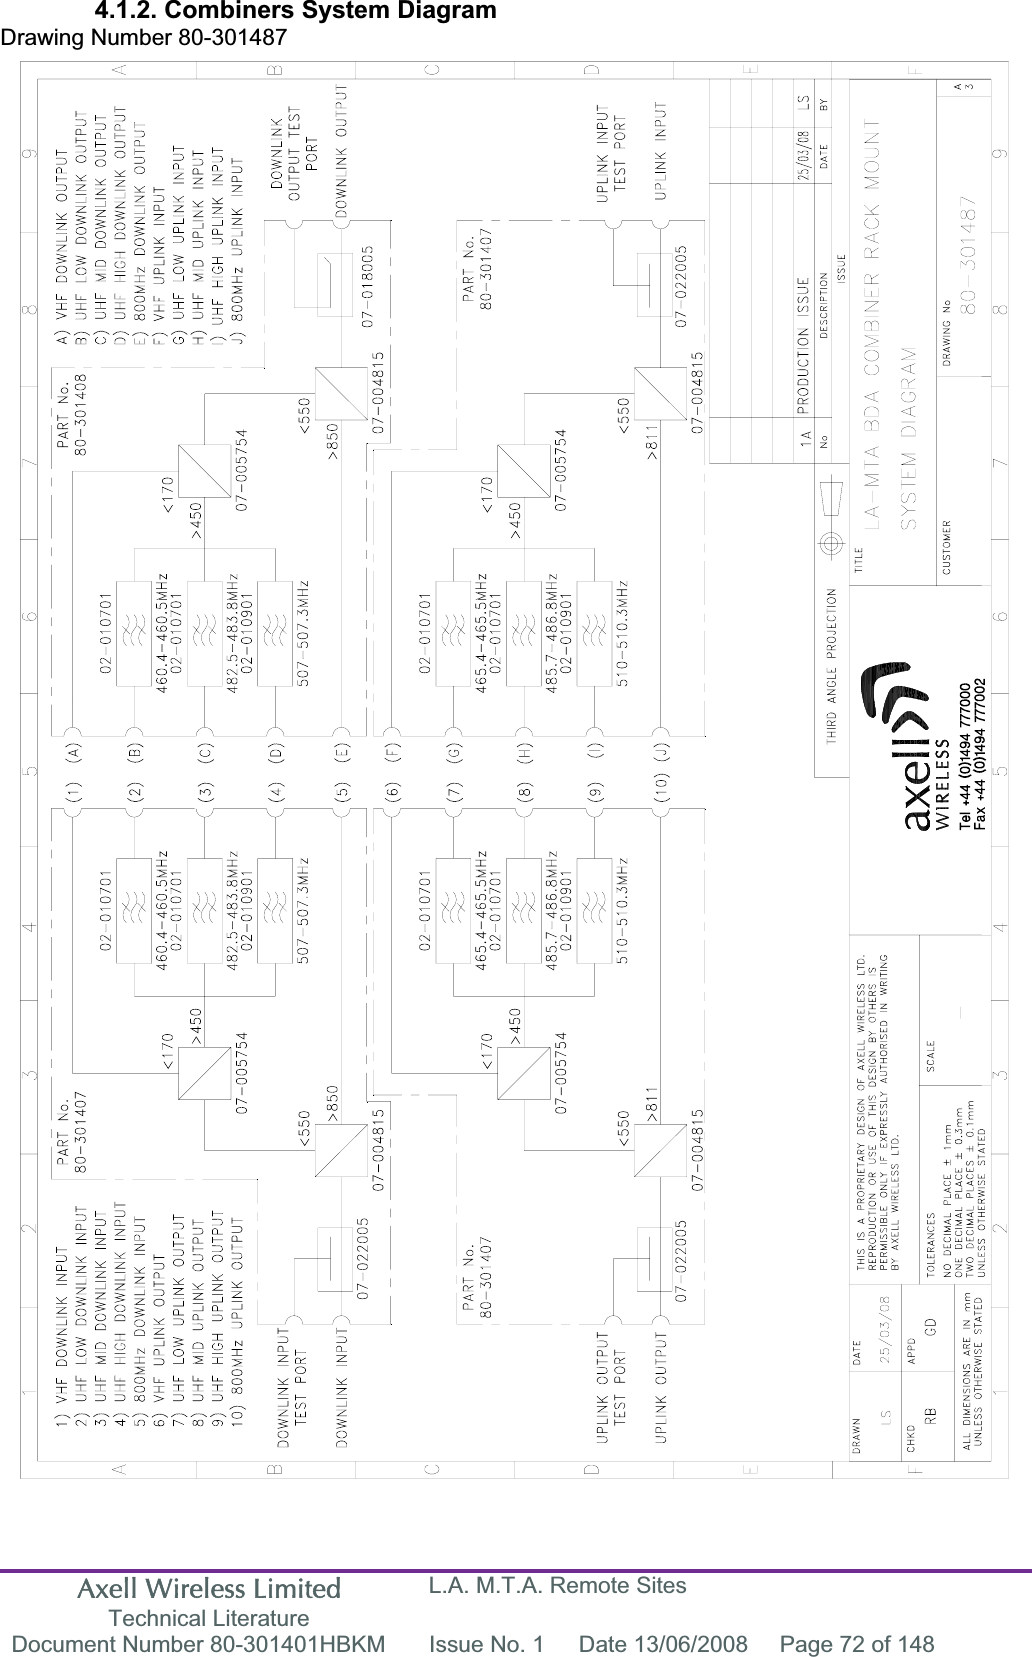 Axell Wireless Limited Technical Literature L.A. M.T.A. Remote Sites Document Number 80-301401HBKM  Issue No. 1  Date 13/06/2008  Page 72 of 148 4.1.2. Combiners System Diagram Drawing Number 80-301487 